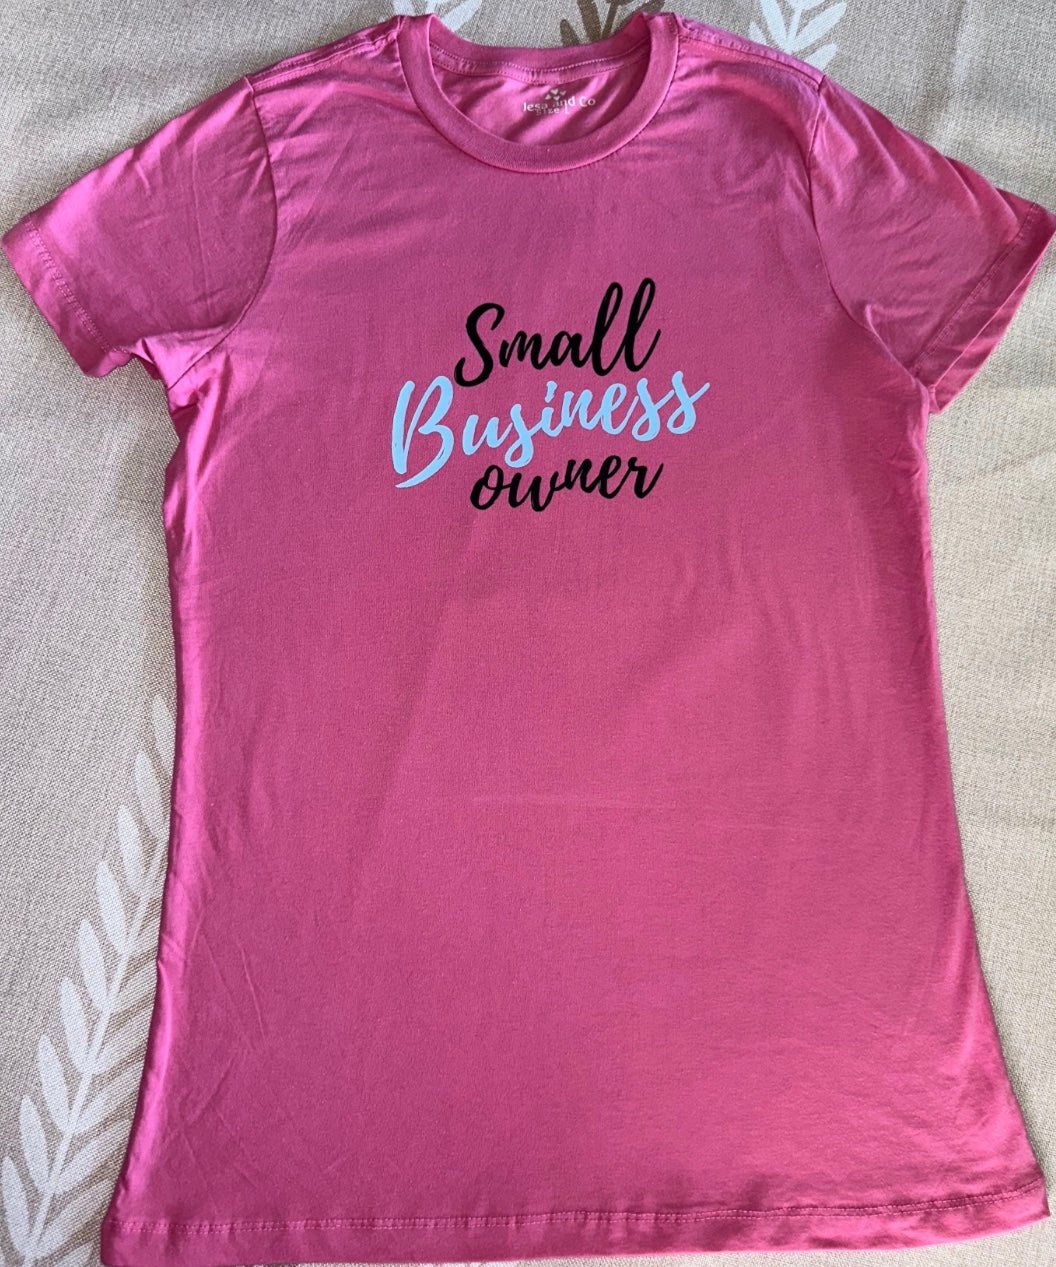 SMALL BUSINESS OWNER SKINNY STYLE T-SHIRTS